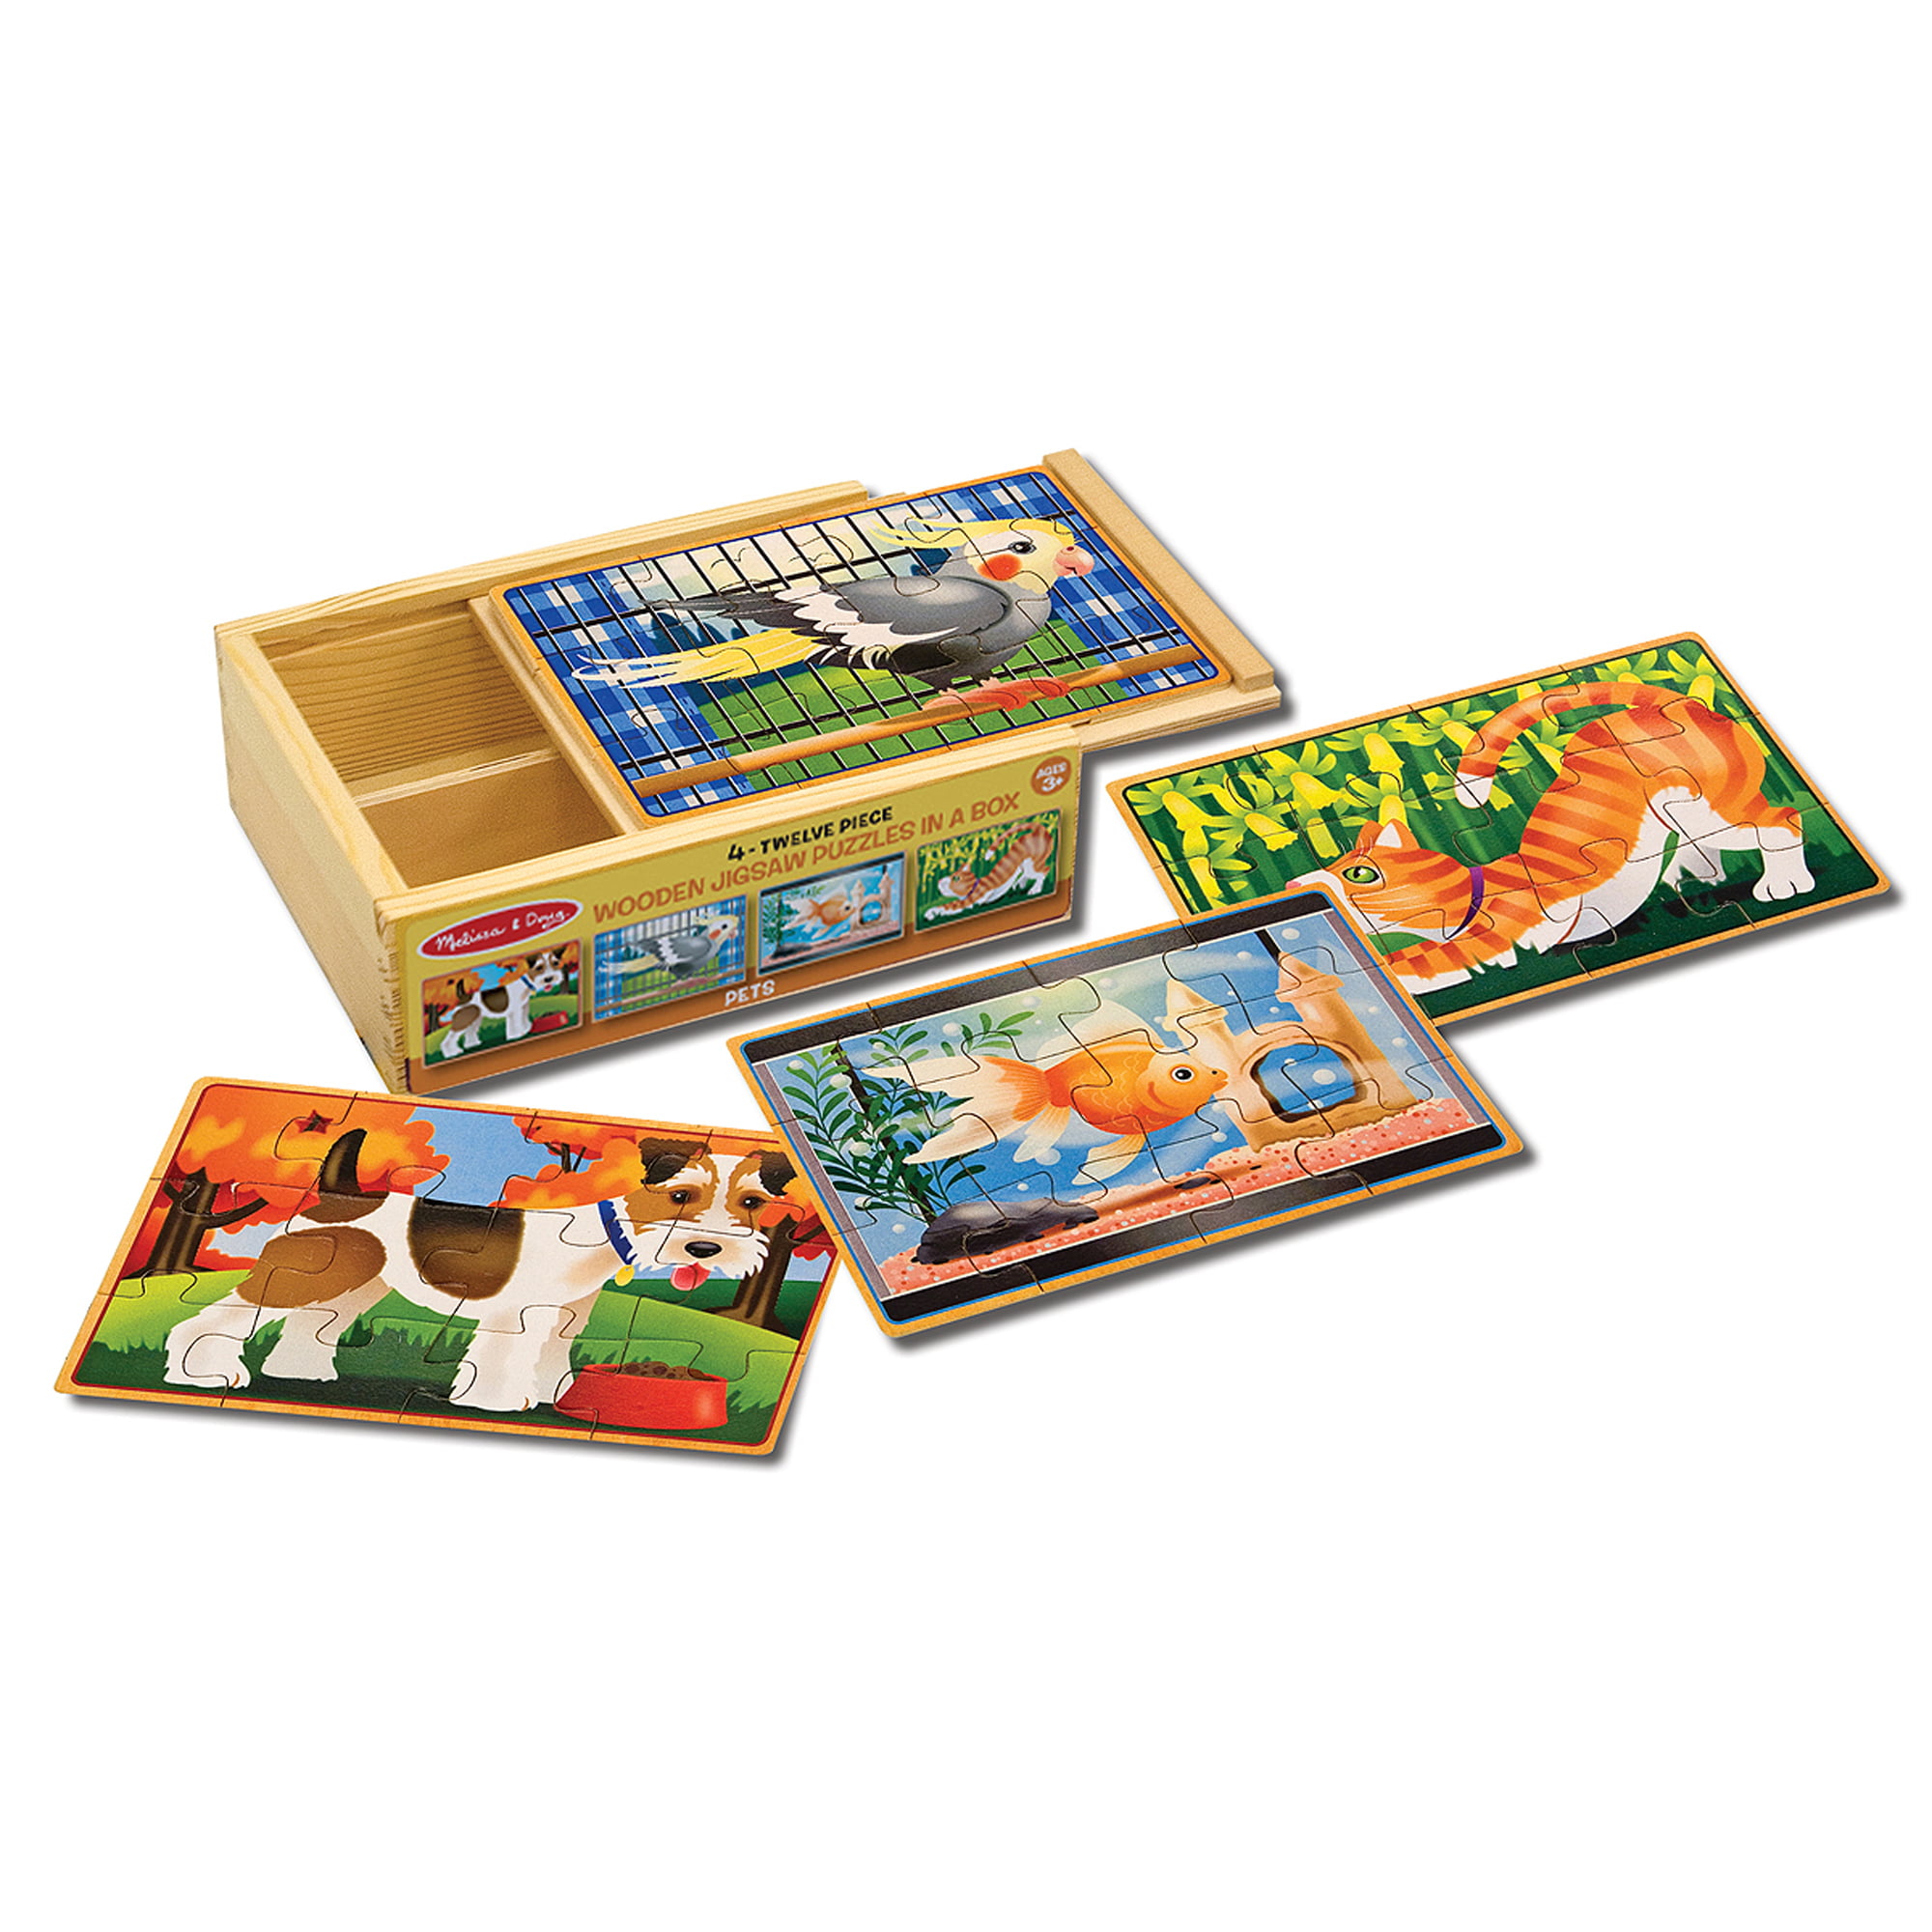 Pet Dogs Puppies Wearing Glasses 500 PC JIGSAW PUZZLE With Keepsake Box 